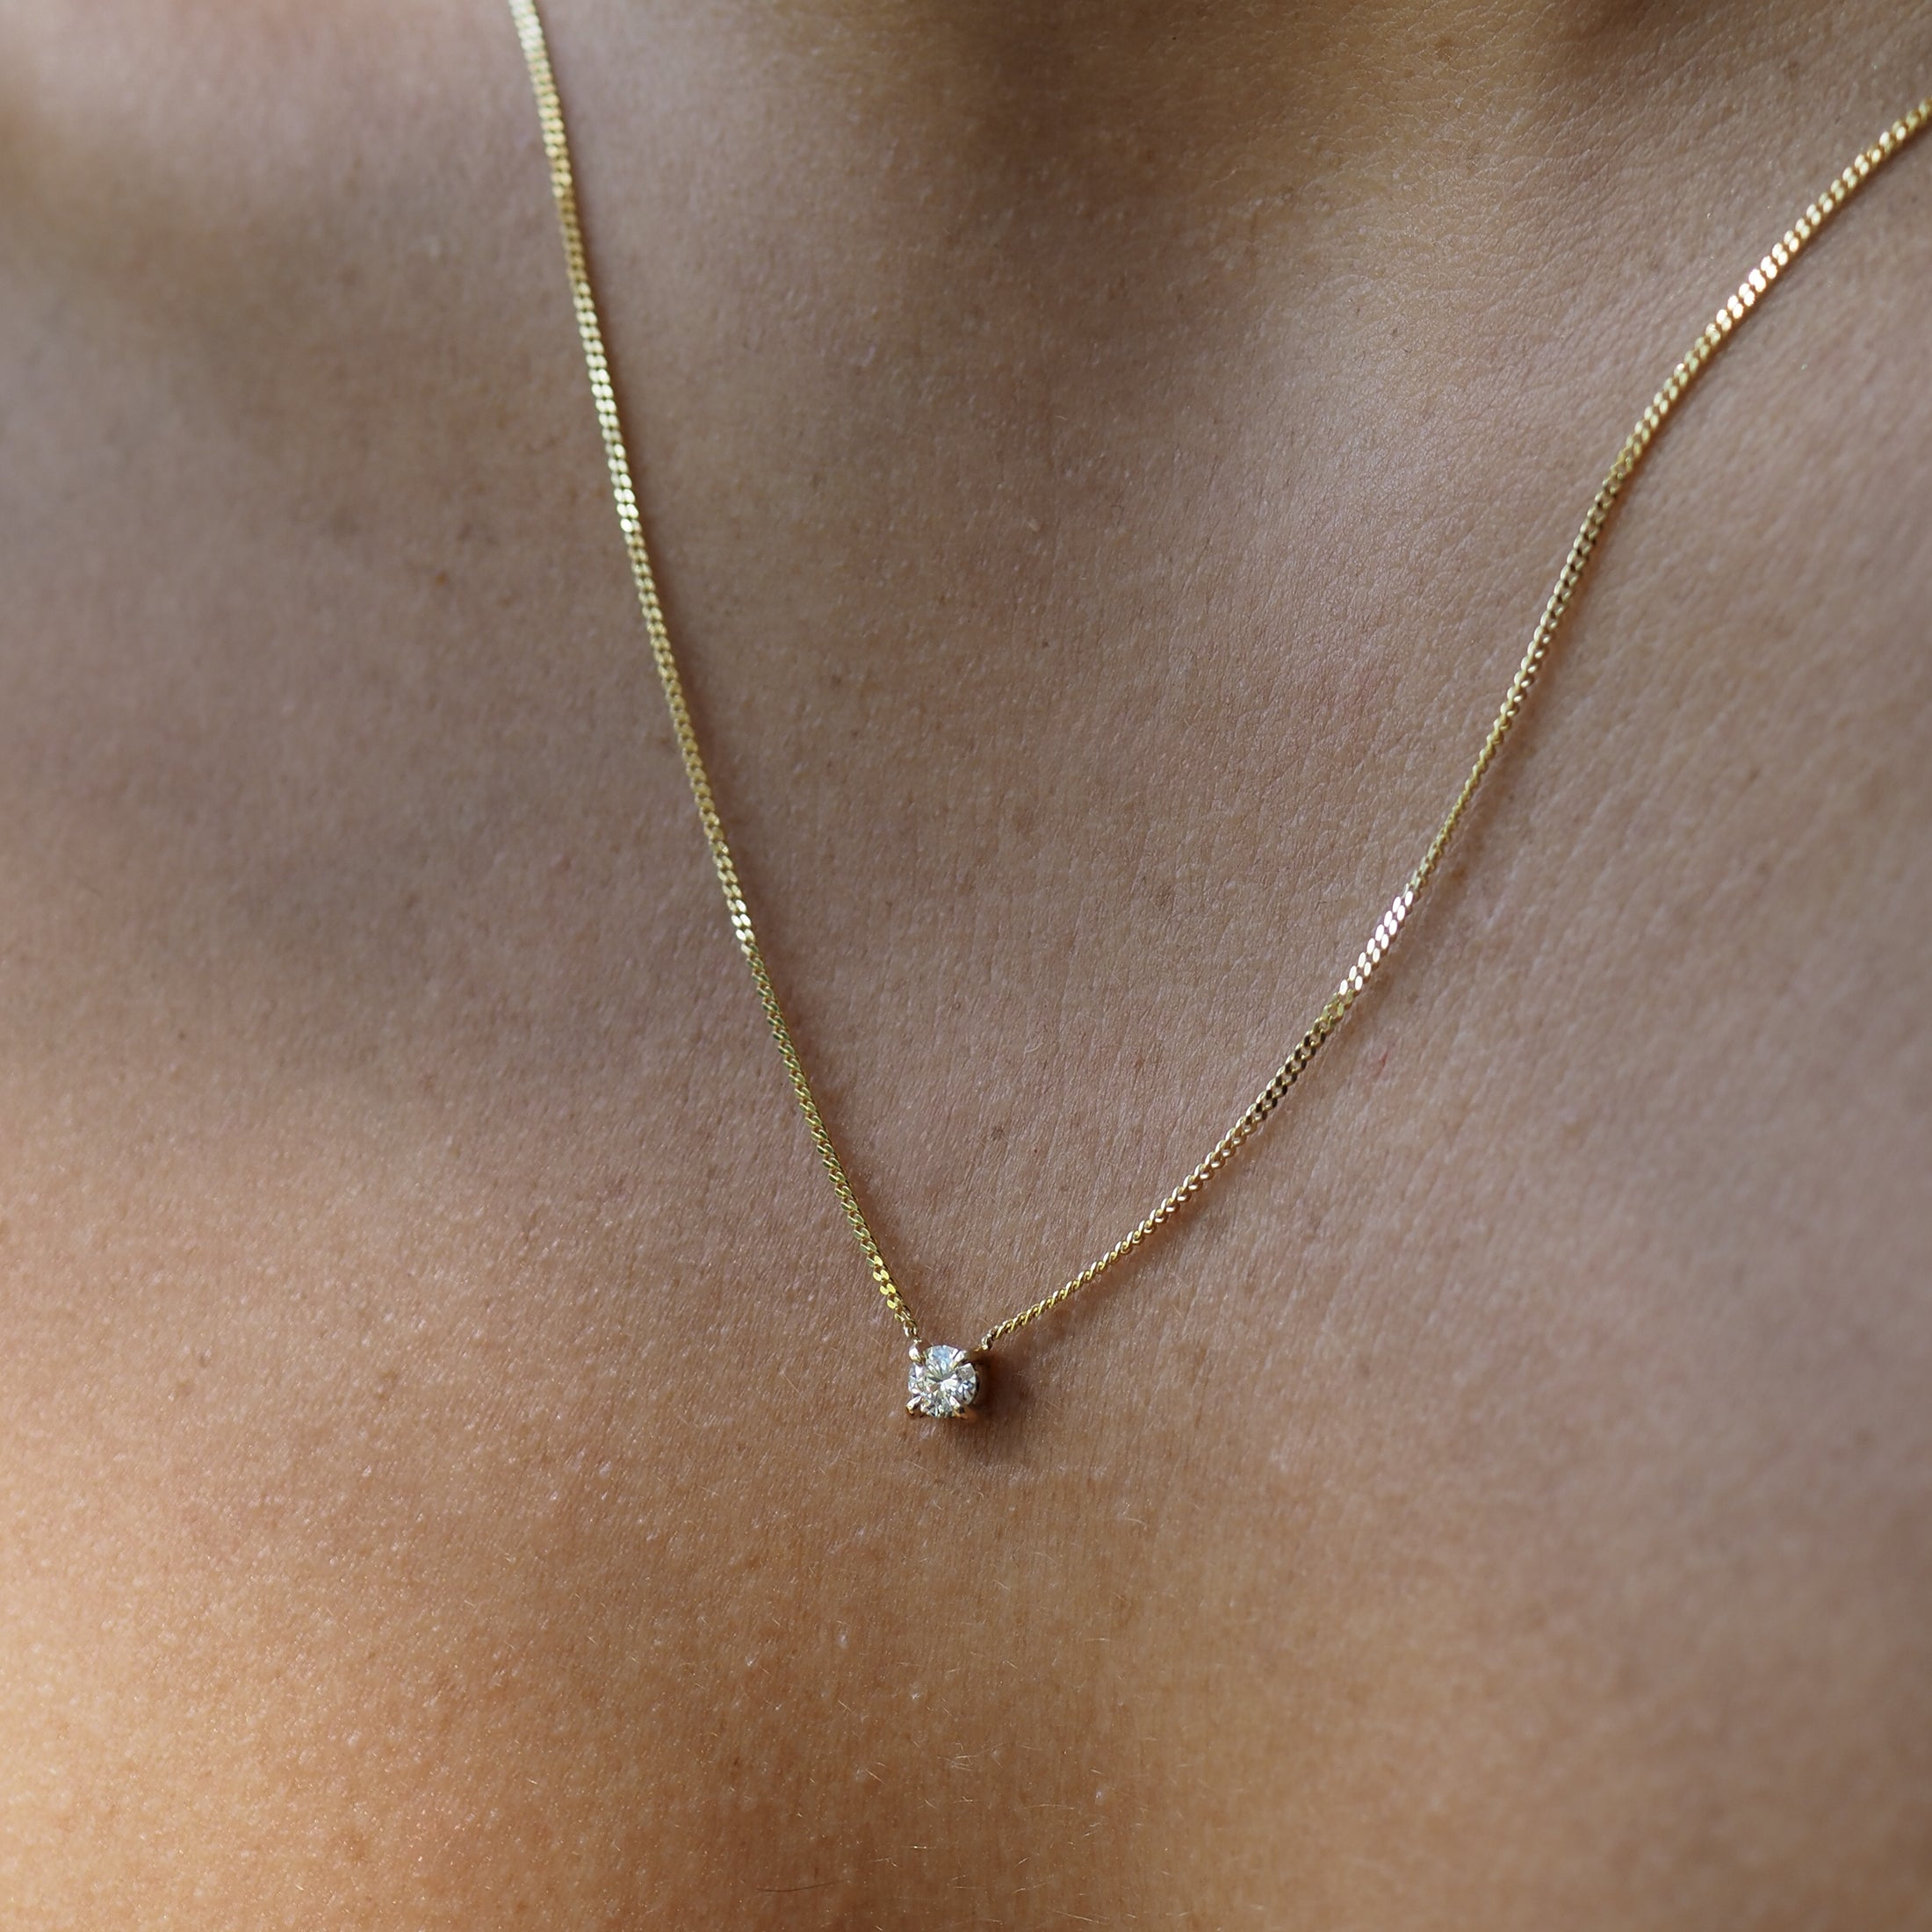 The Round Diamond Necklace features a circular lab-grown diamond among a yellow gold chain, handset within four claws. 